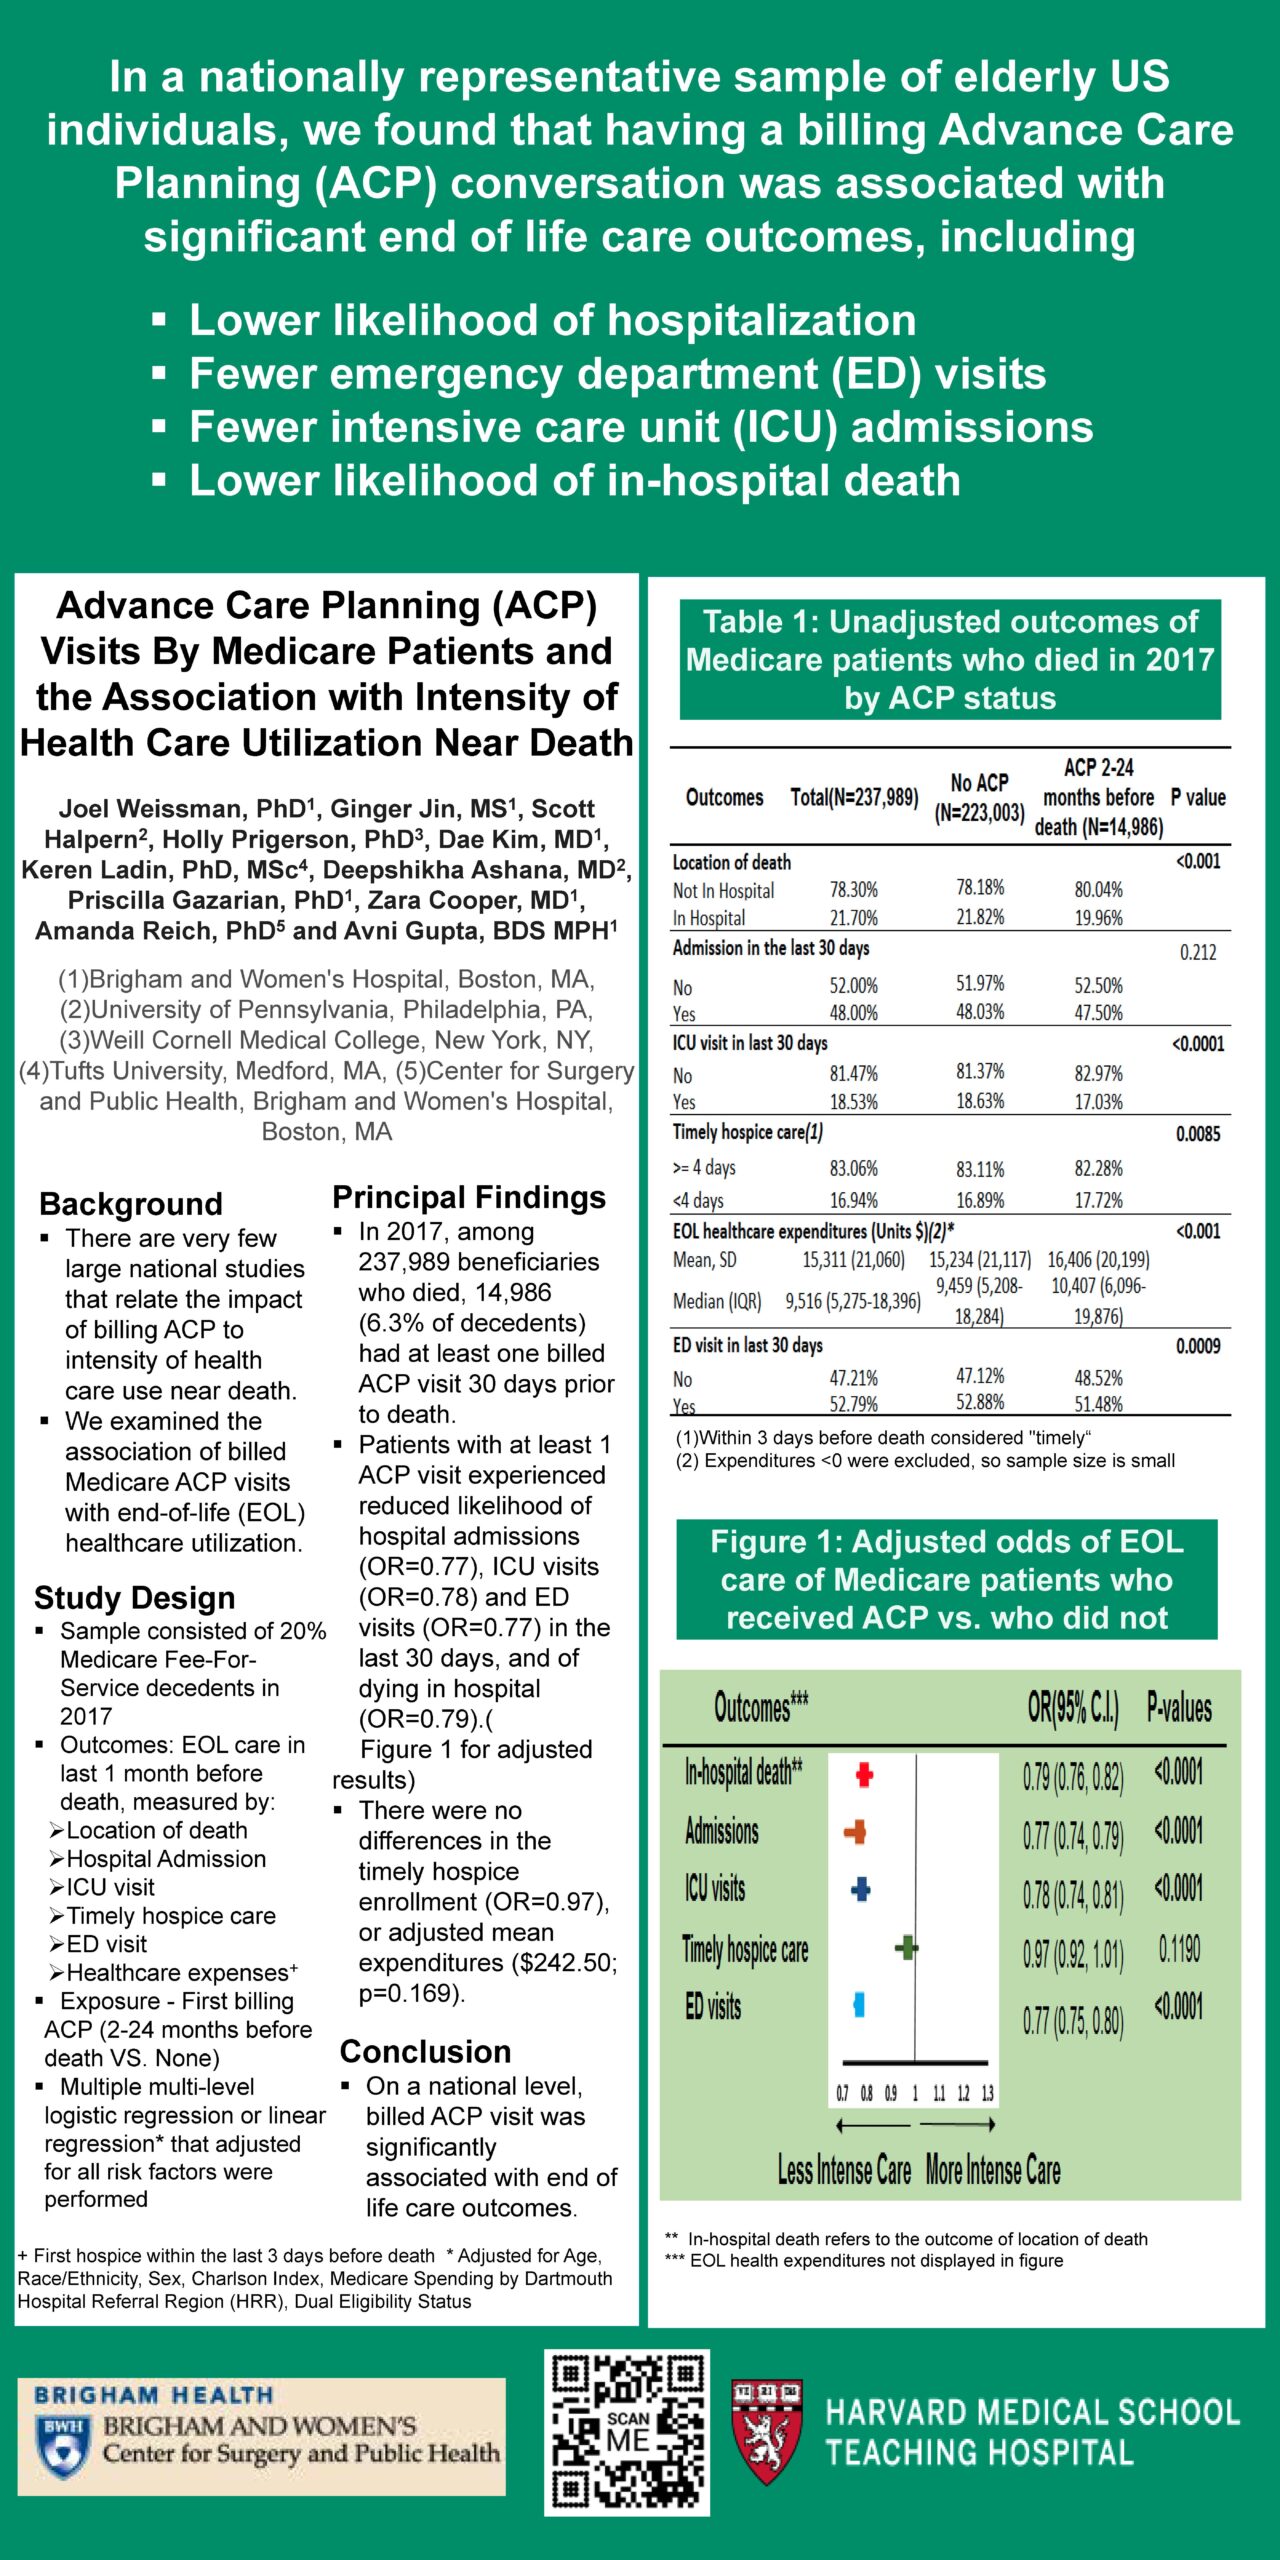 Academy Health Annual Research Meeting 2019: Advance Care Planning (ACP) Visits by Medicare Patients and the Association with Intensity of Healthcare Utilization Near Death